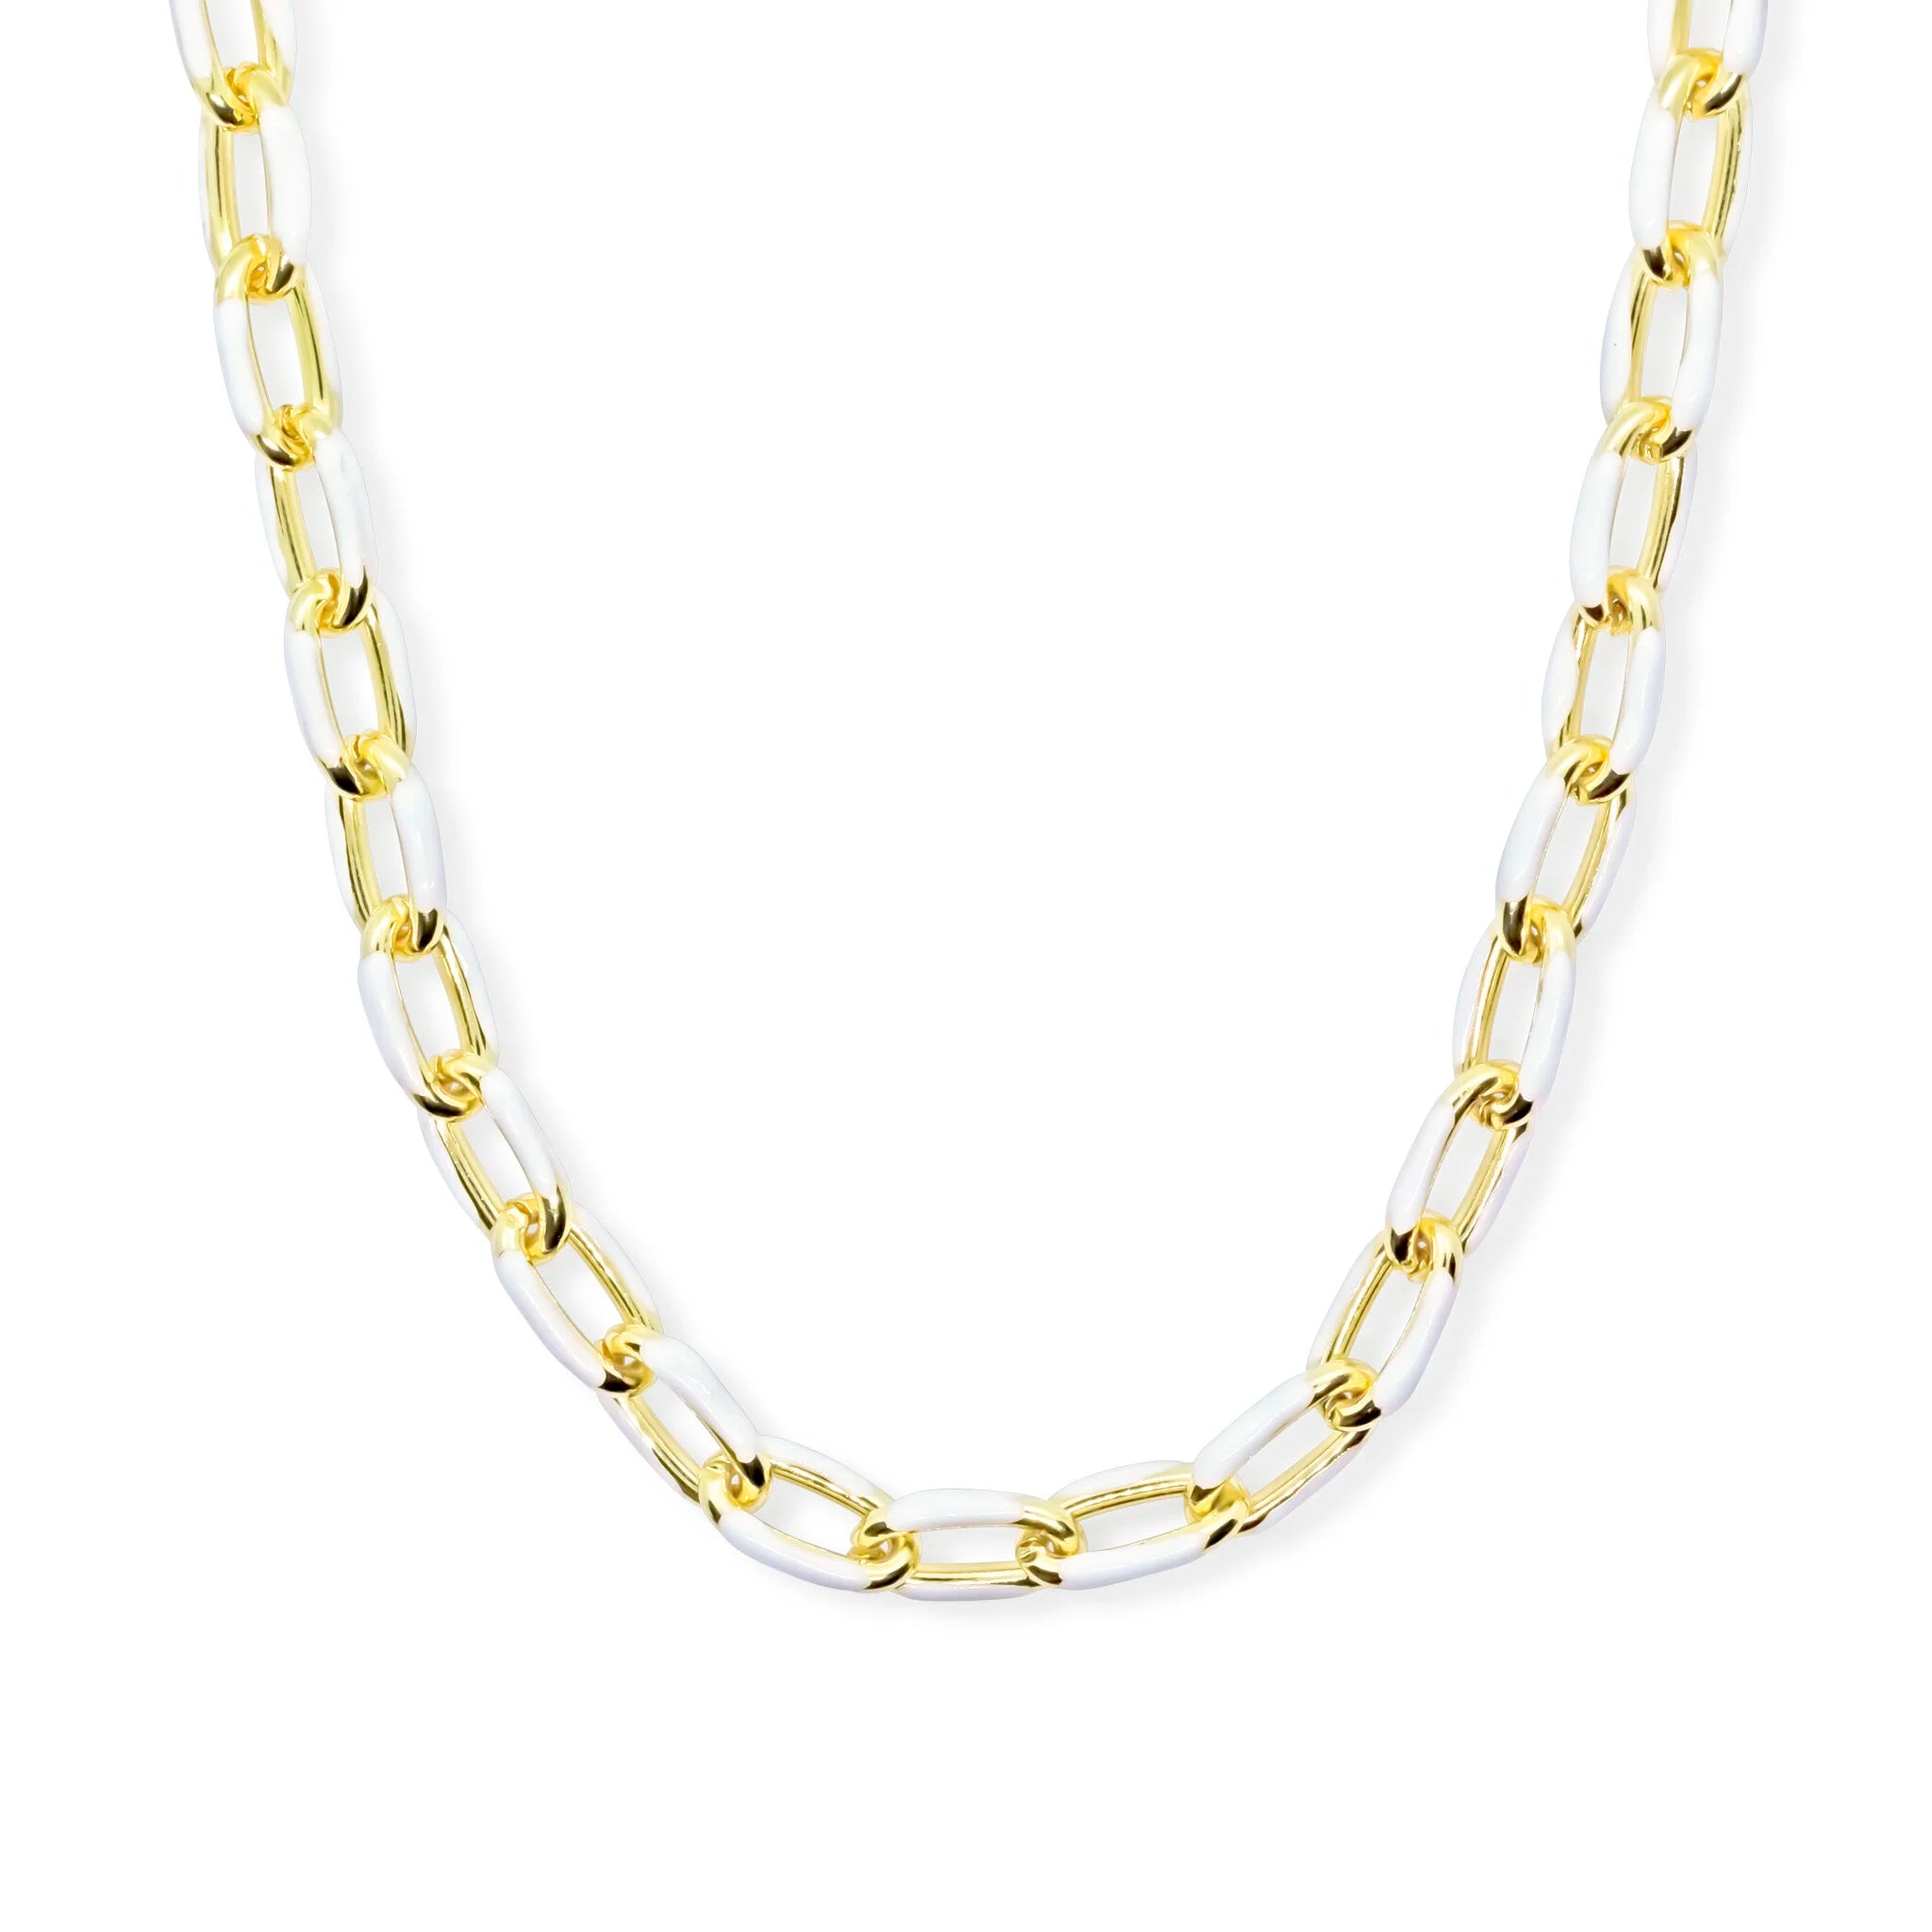 N321 The Baxter Paperclip Enamel Chain Collection